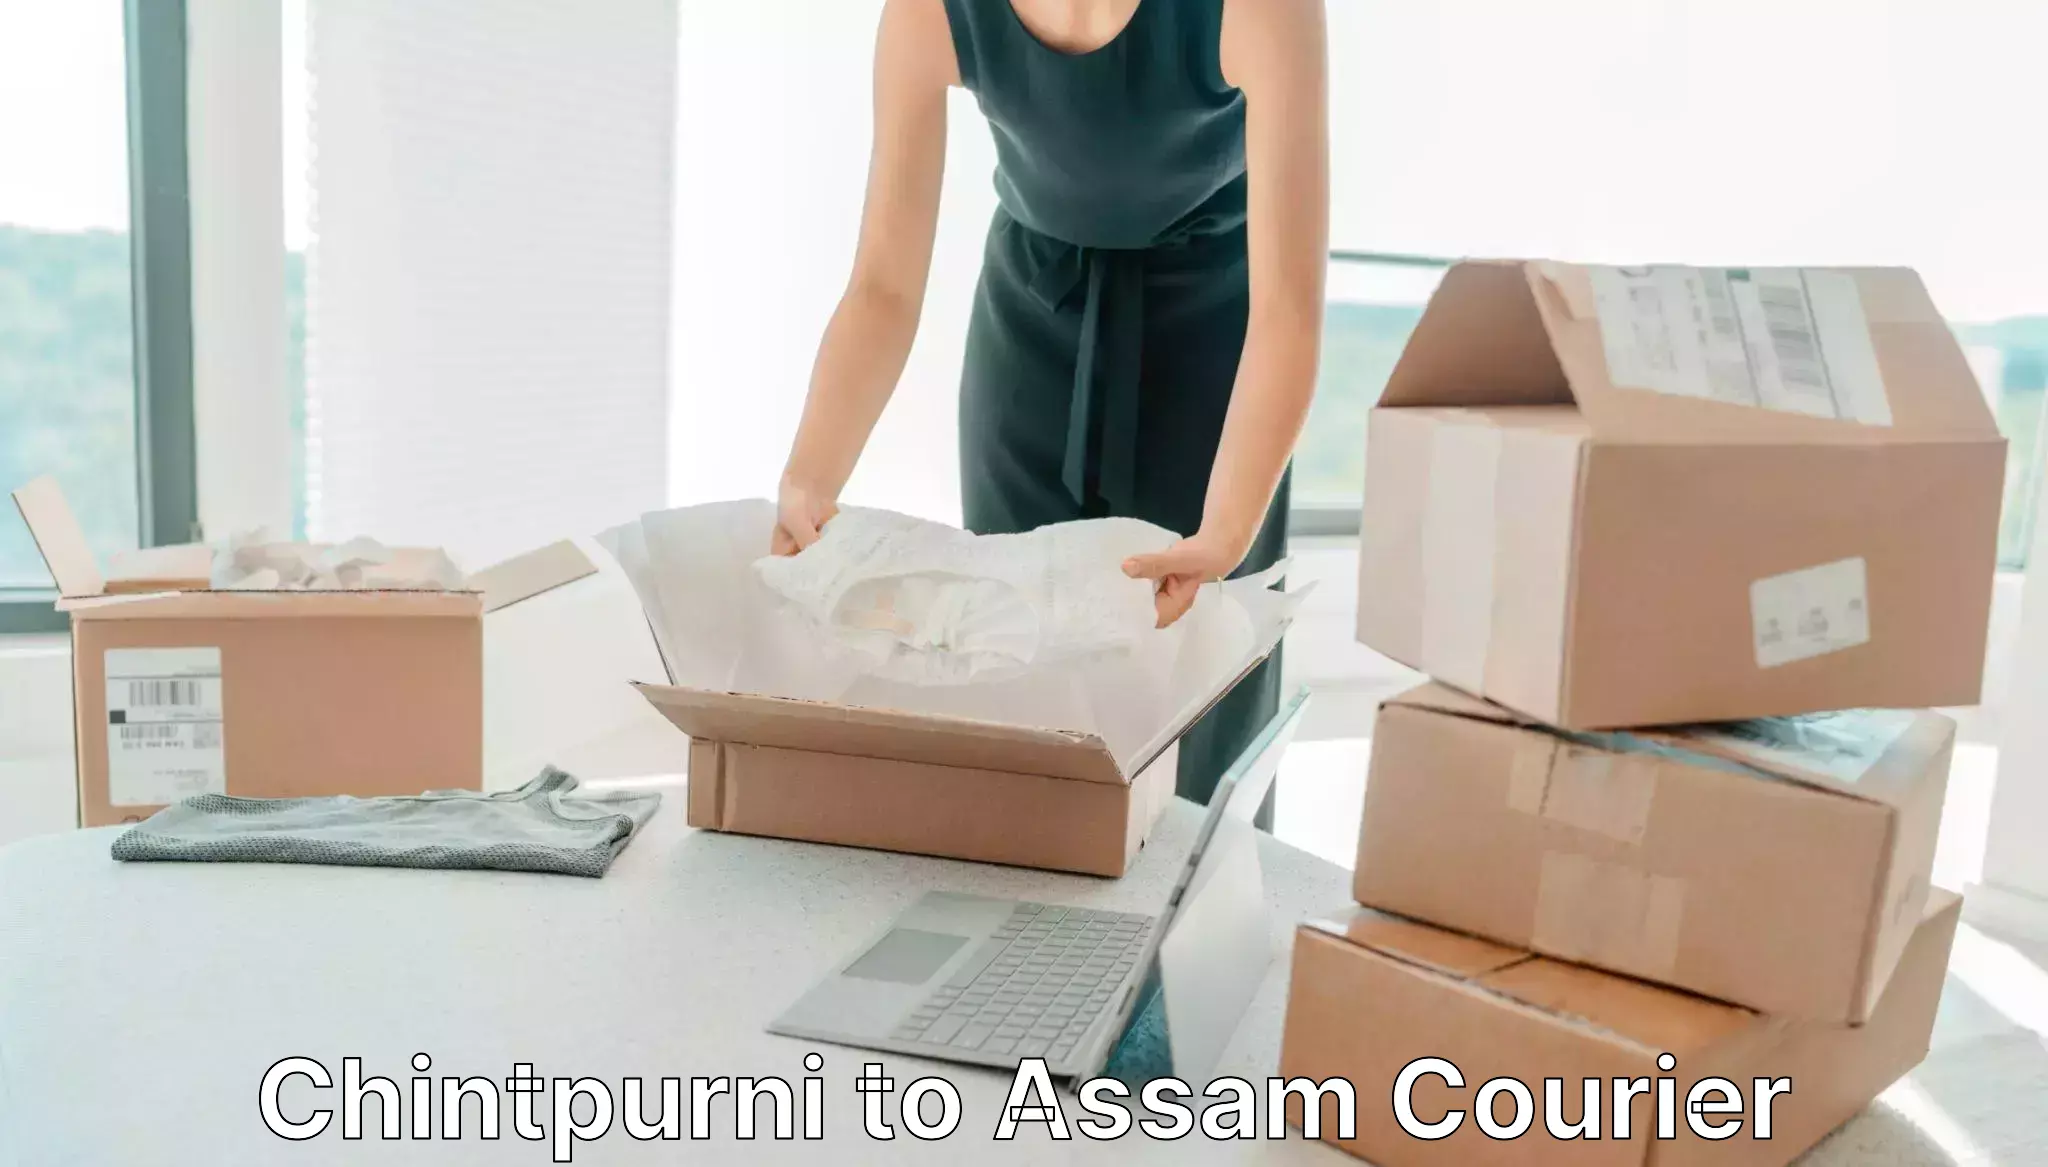 Courier tracking online Chintpurni to Dhing Town